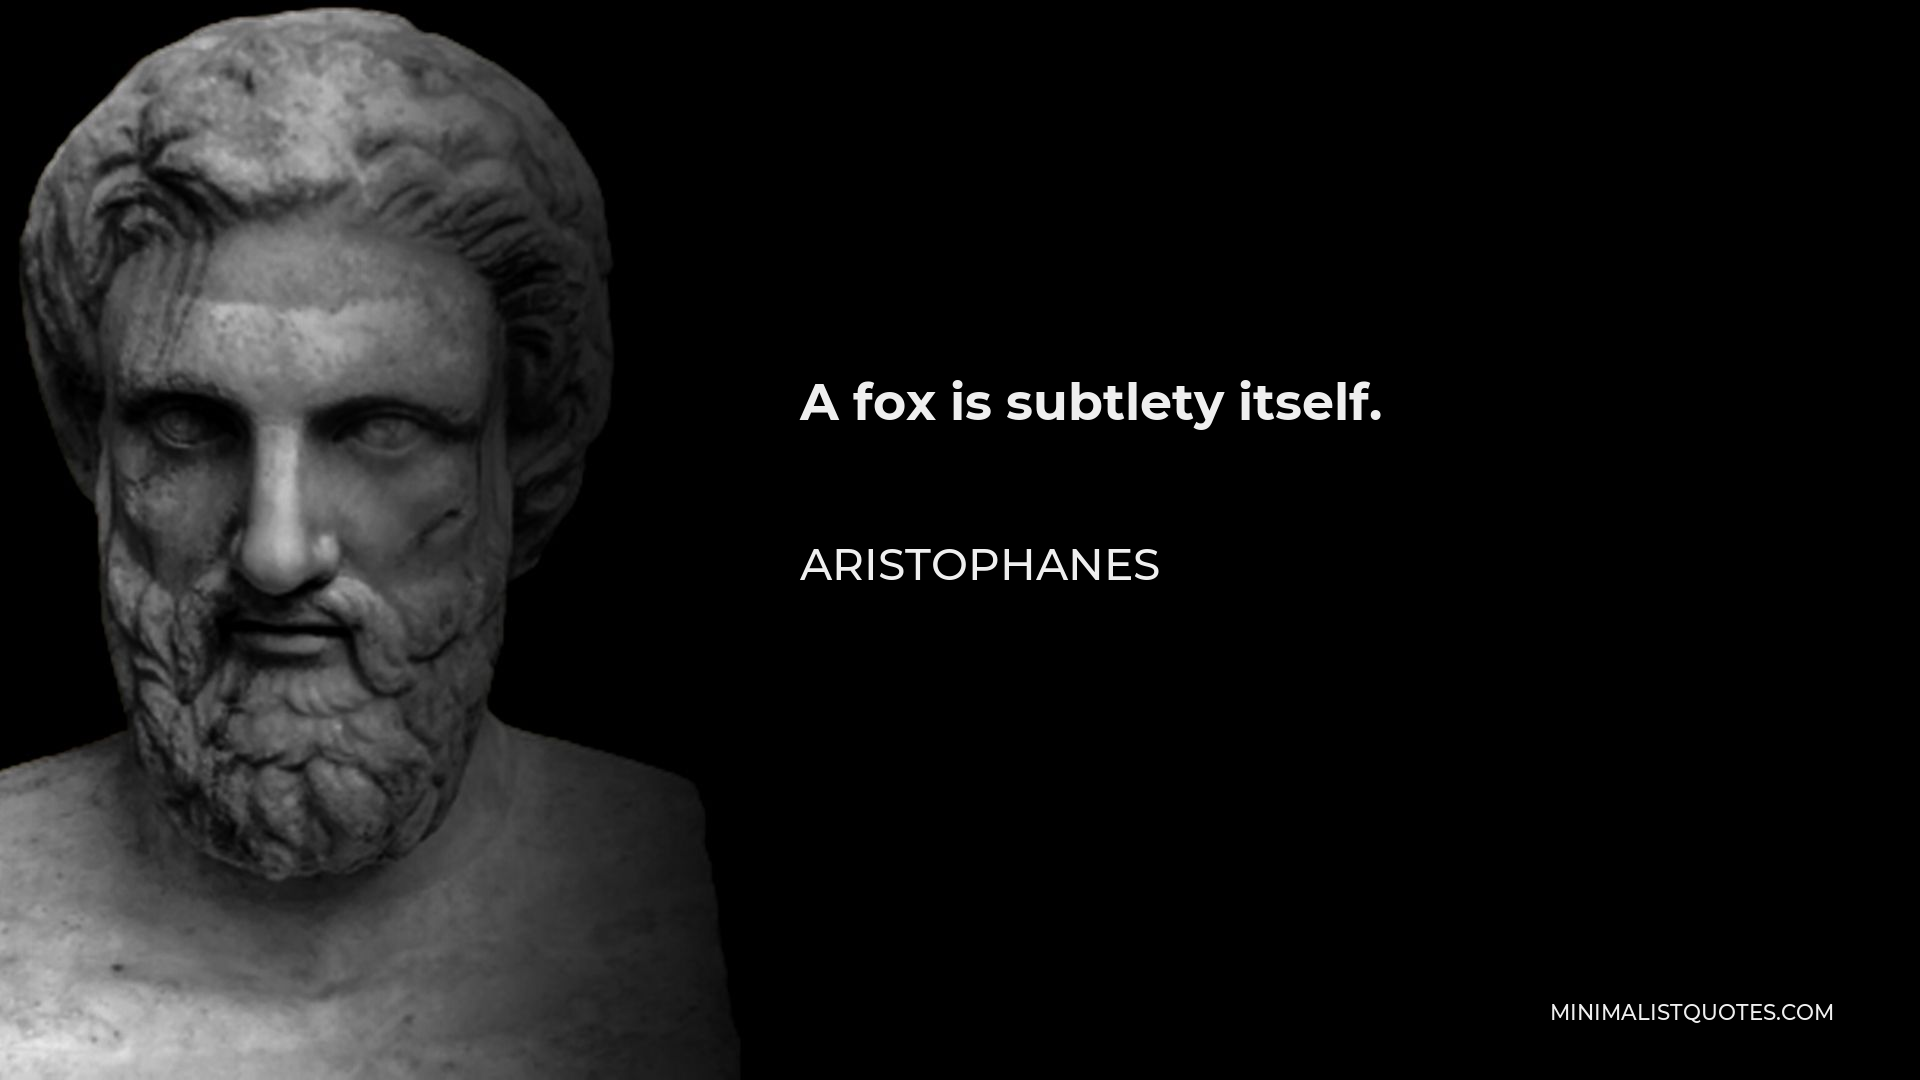 Aristophanes Quote - A fox is subtlety itself.